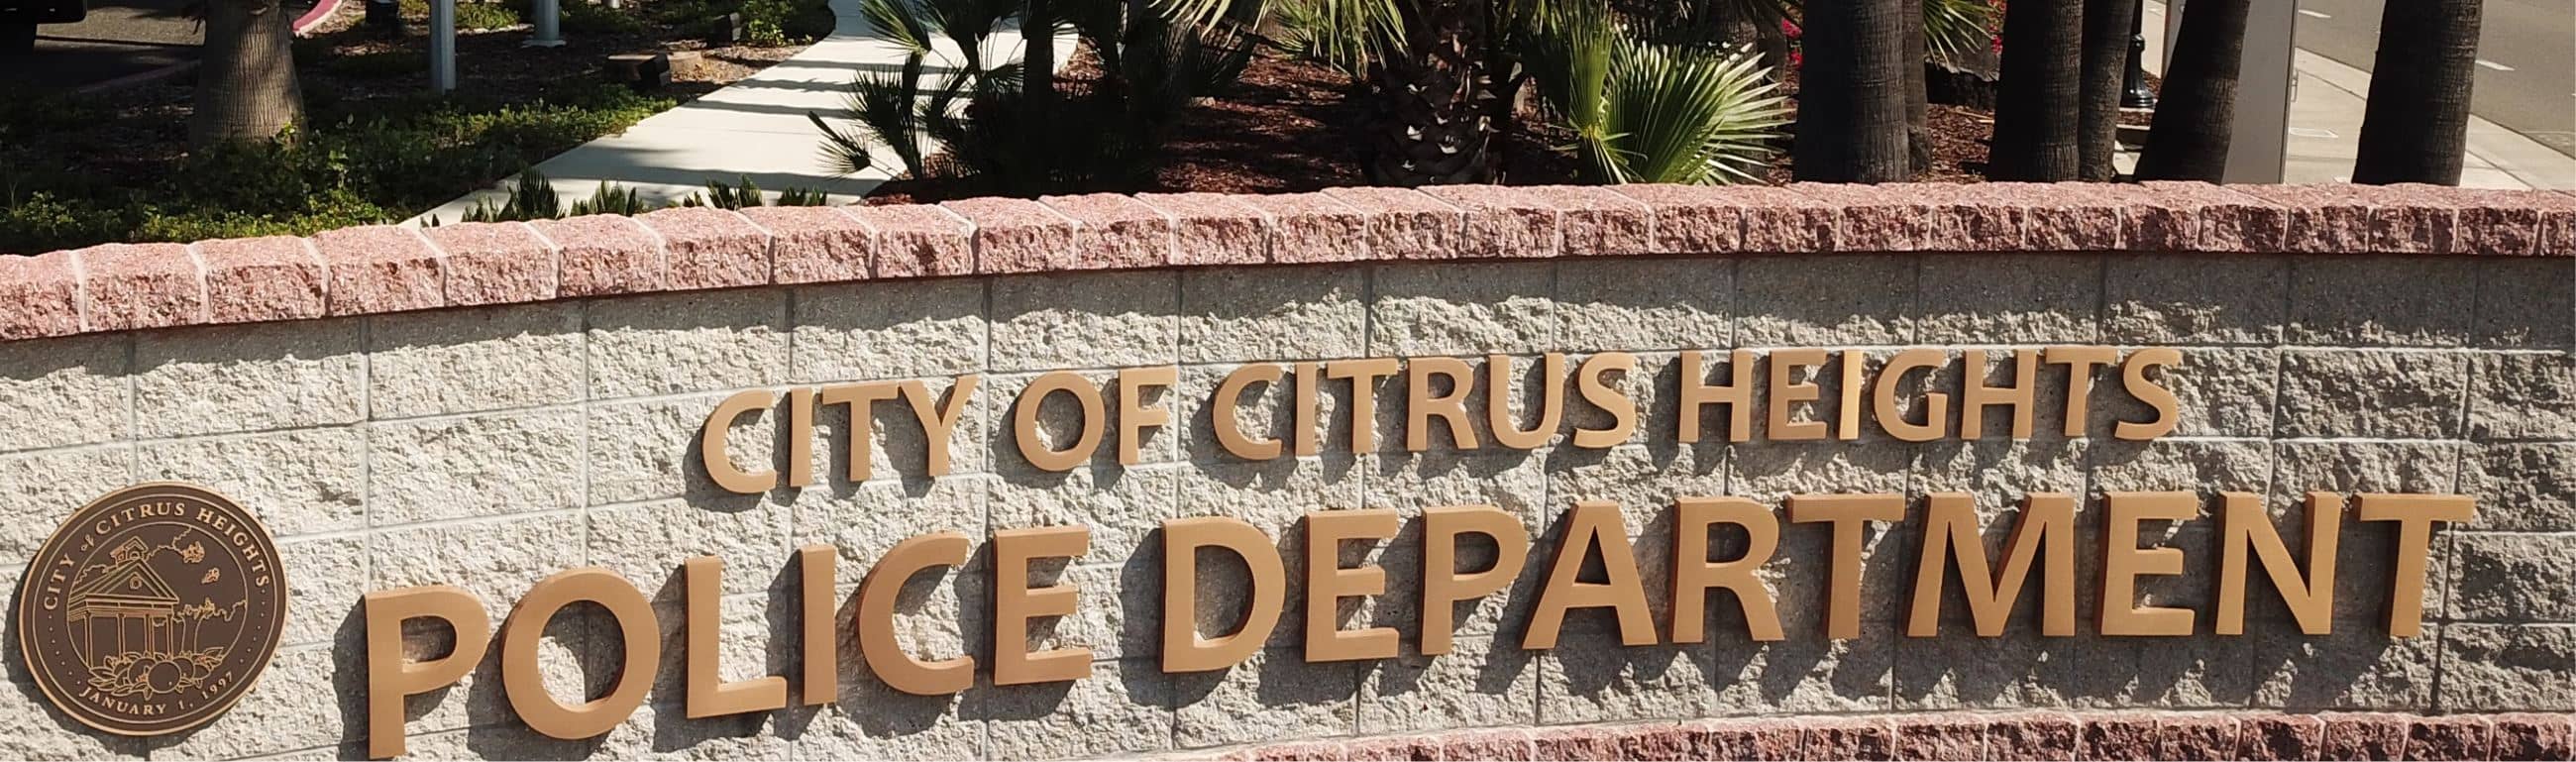 Image of City of Citrus Heights Police Department